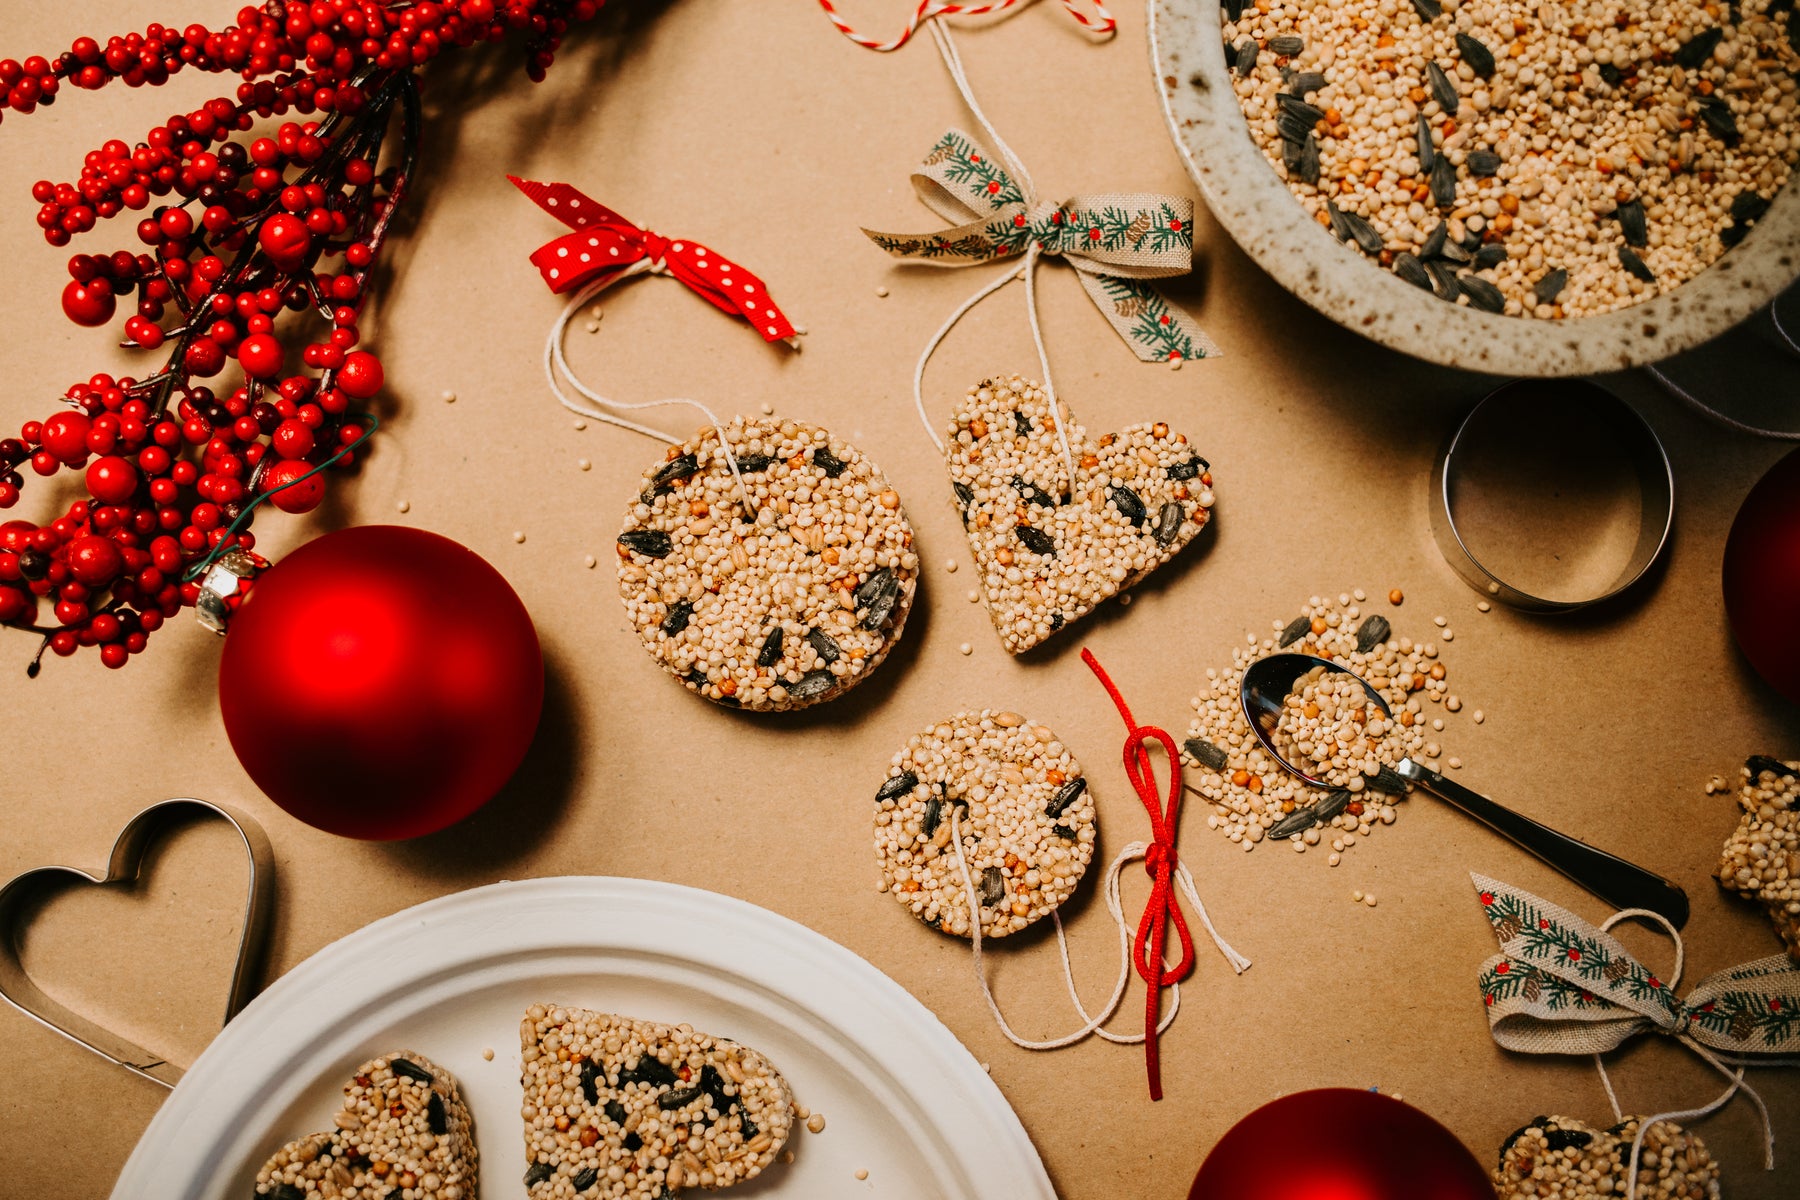 How to Make Bird Seed Ornaments